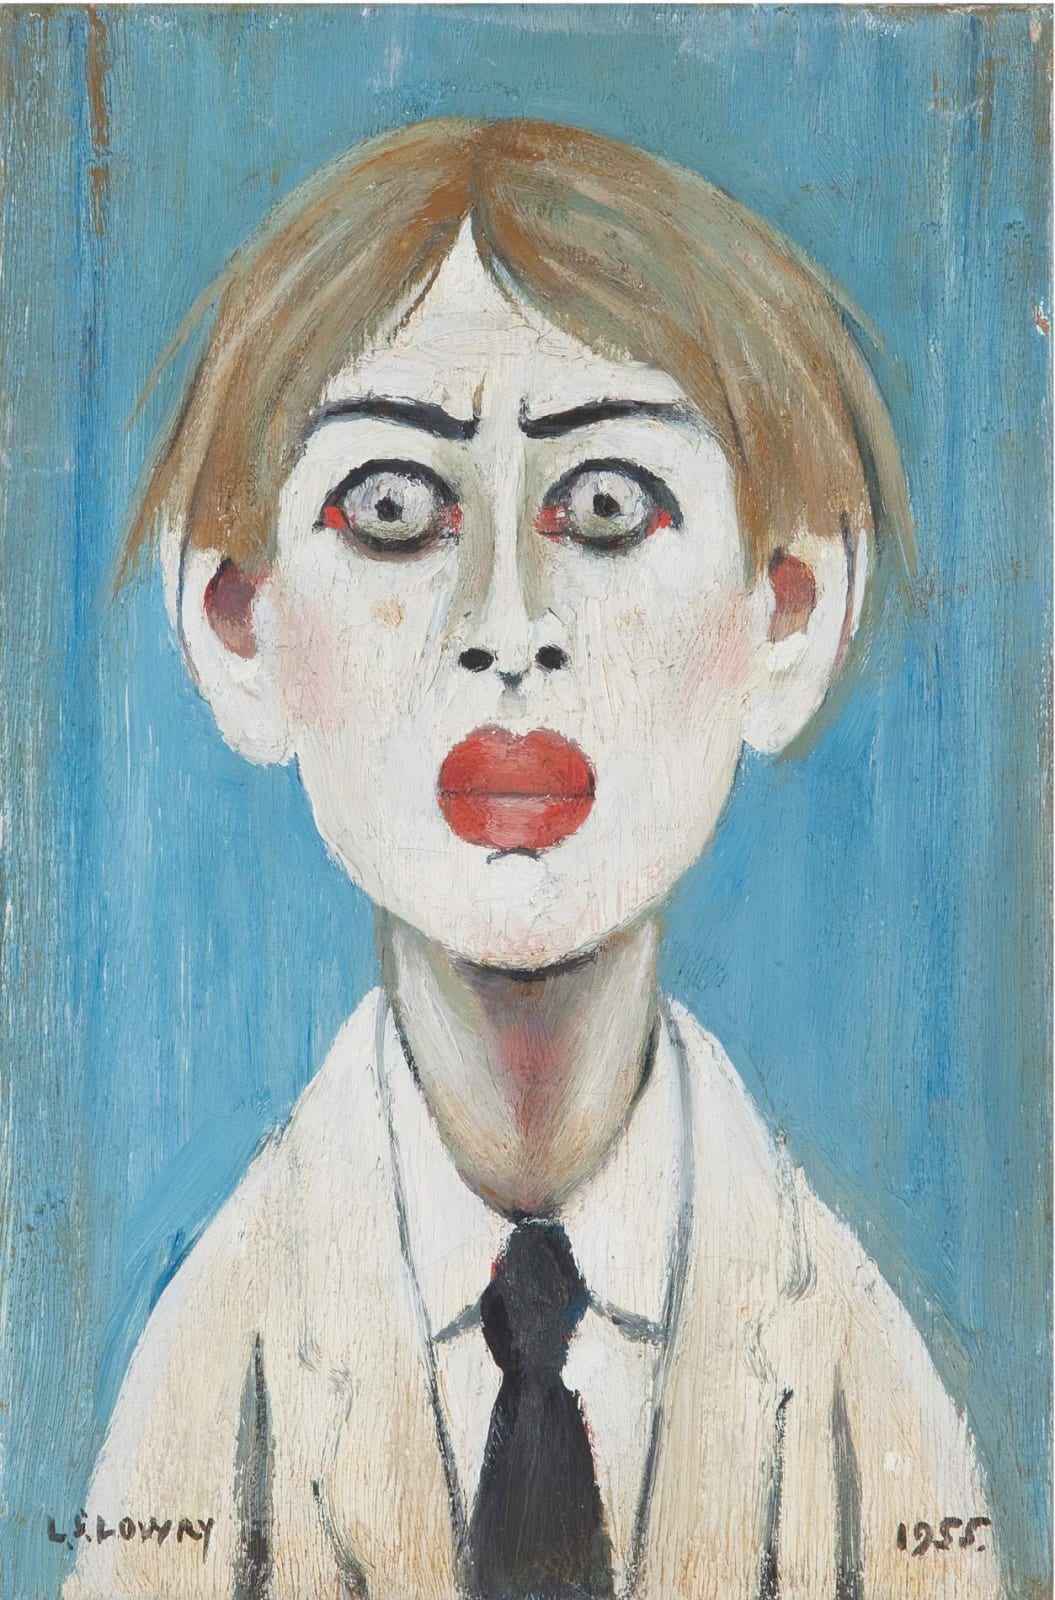 L.S. Lowry (1887-1976) Portrait of a Young Man 1955 Oil on canvas 30.5 x 20.3 cm The Frank Cohen Collection To see and discover more about this artist click here